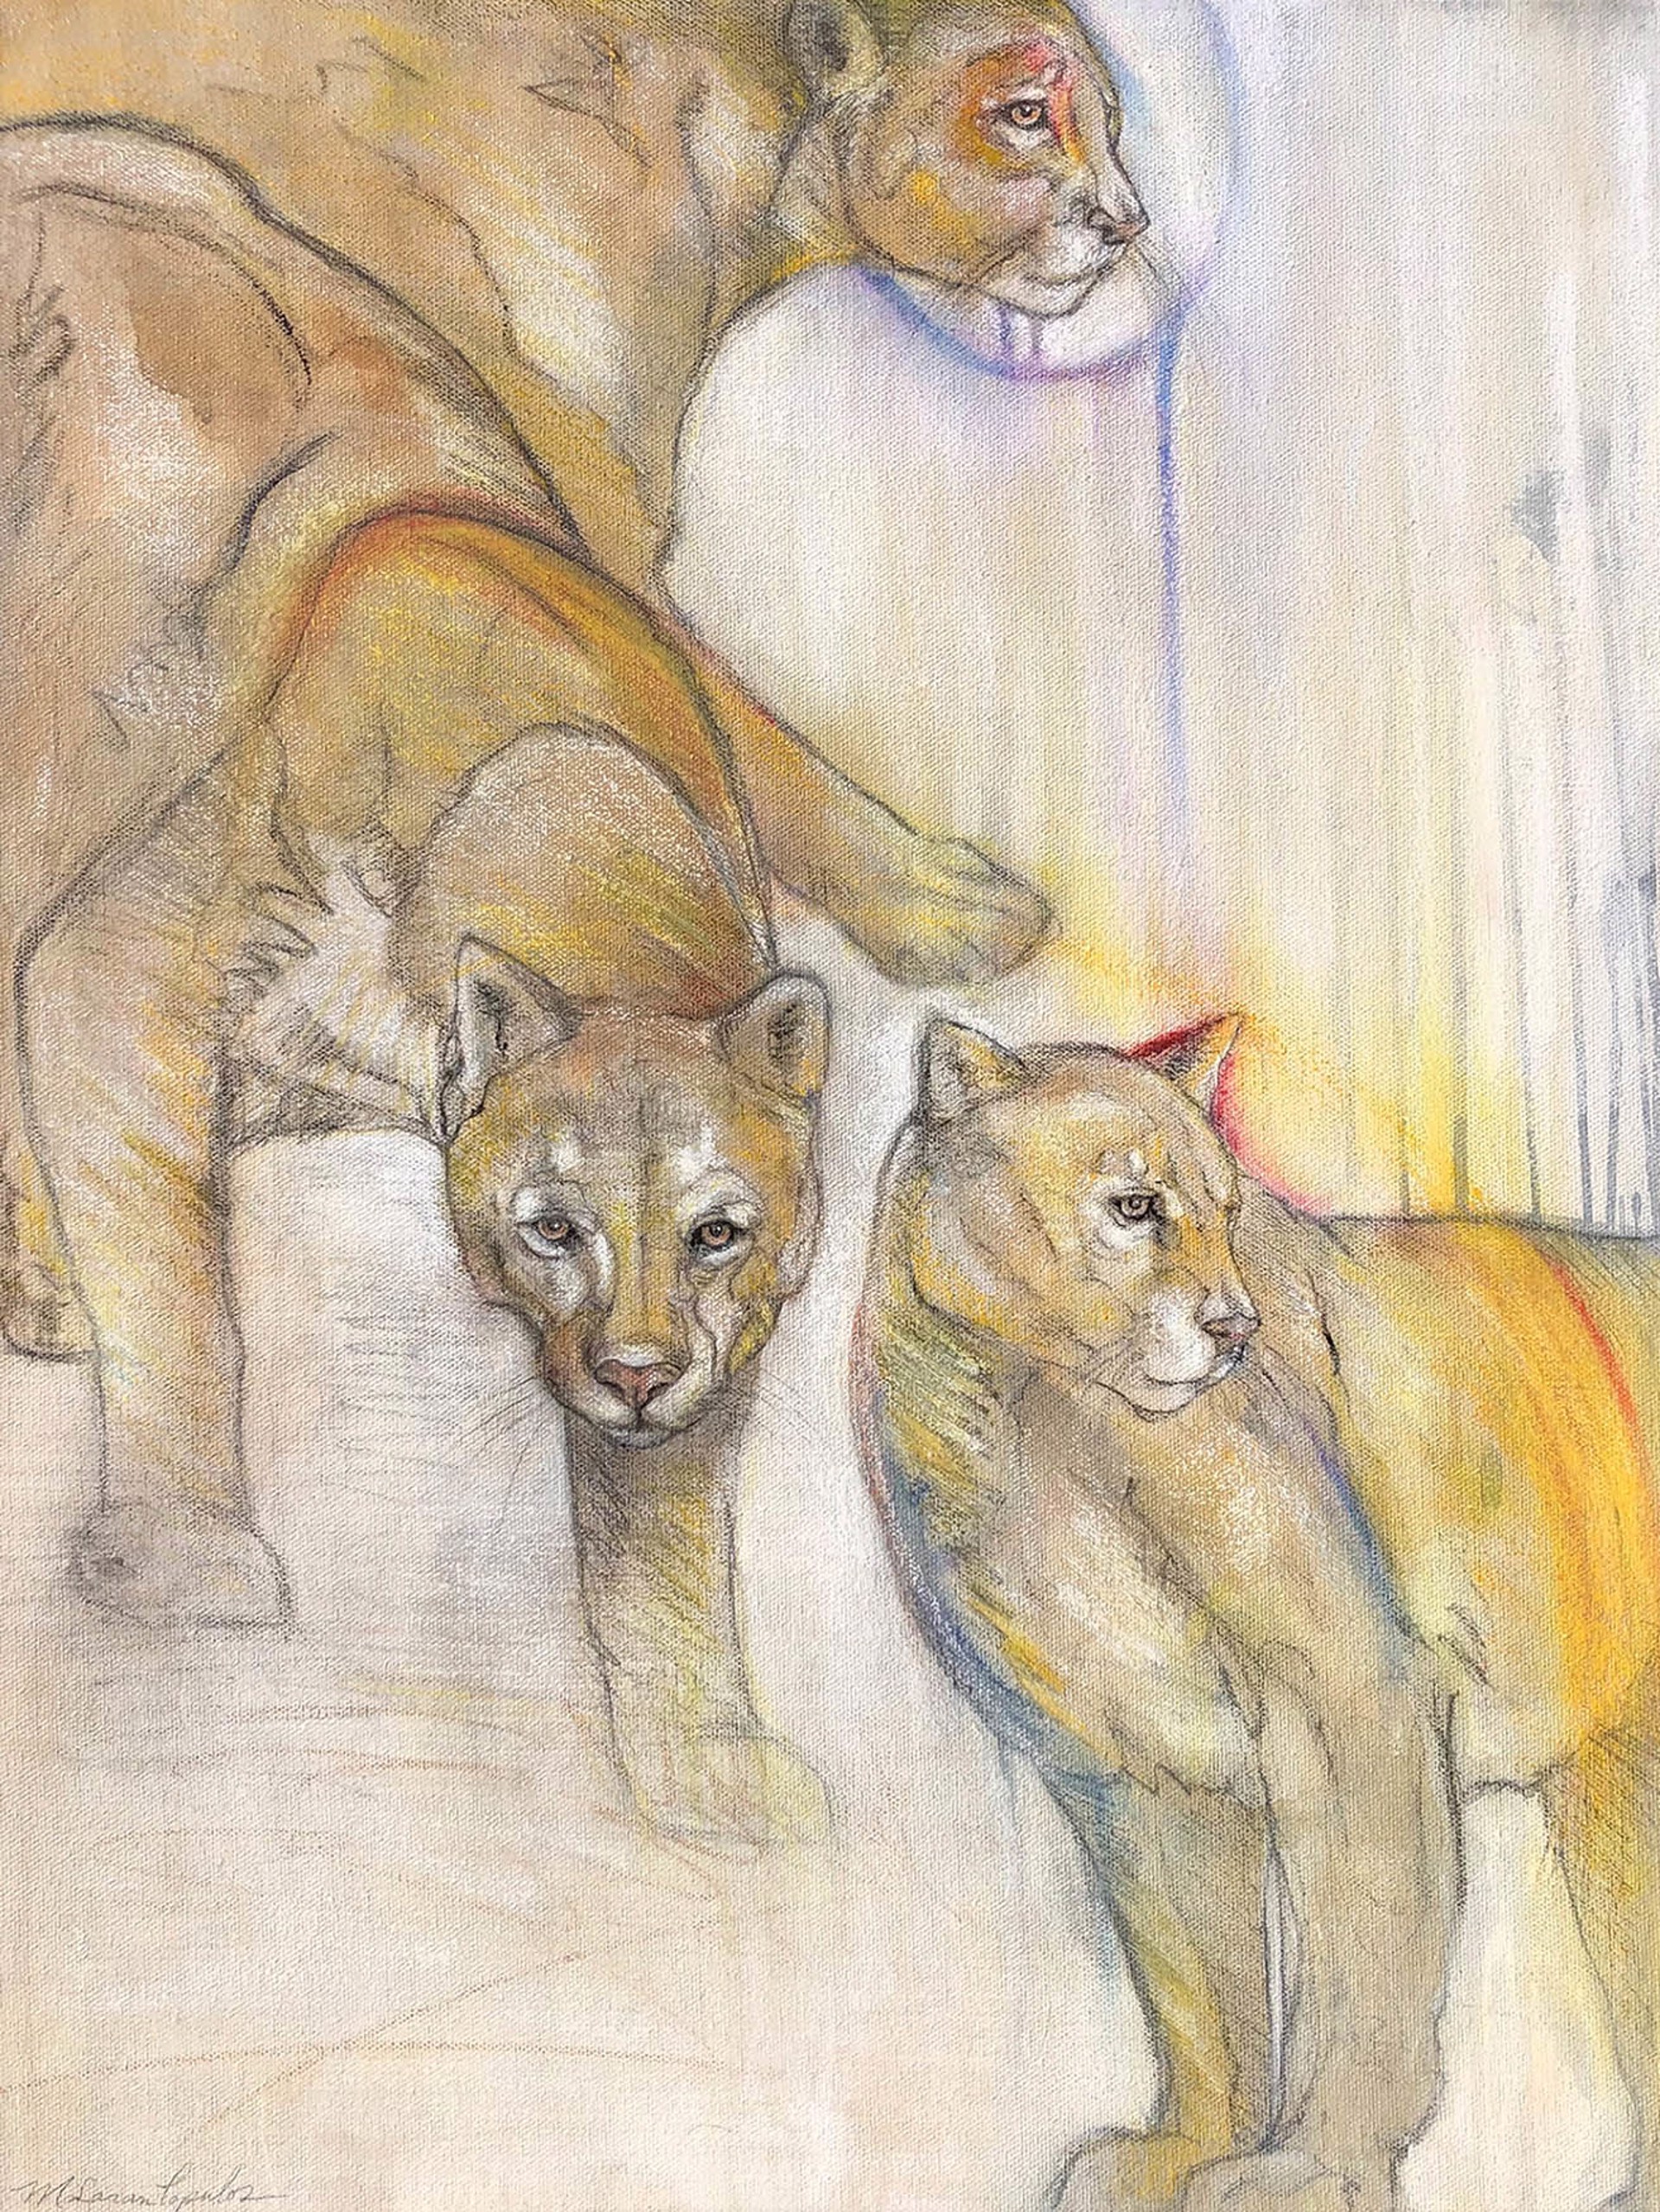 Original Mixed Media Painting Featuring Three Cougars With Abstract Details 